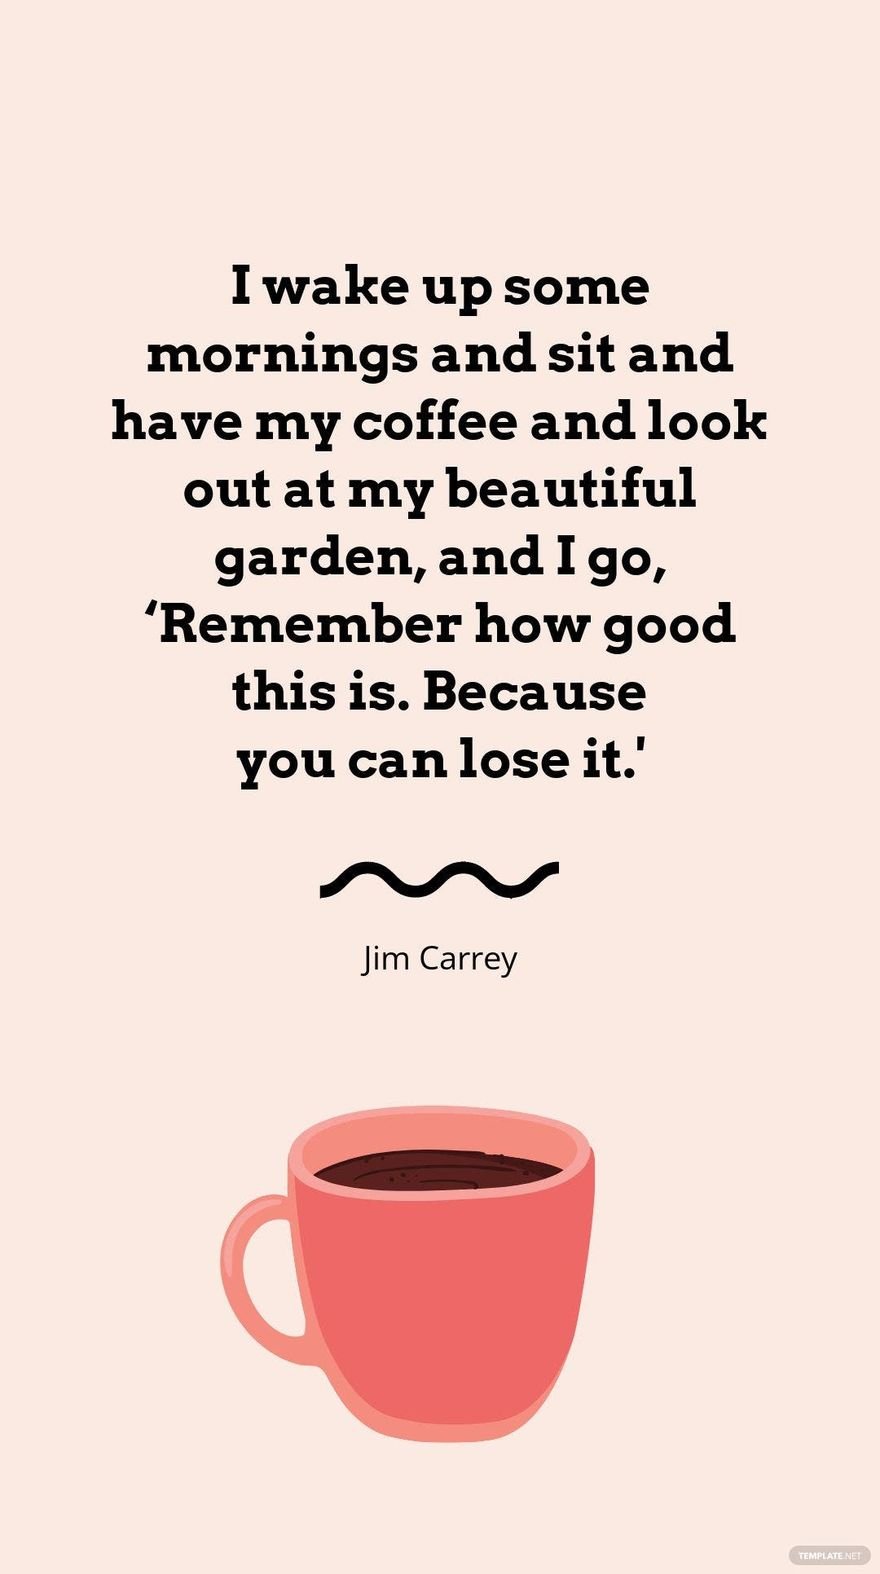 Jim Carrey - I wake up some mornings and sit and have my coffee and look out at my beautiful garden, and I go, ‘Remember how good this is. Because you can lose it.'